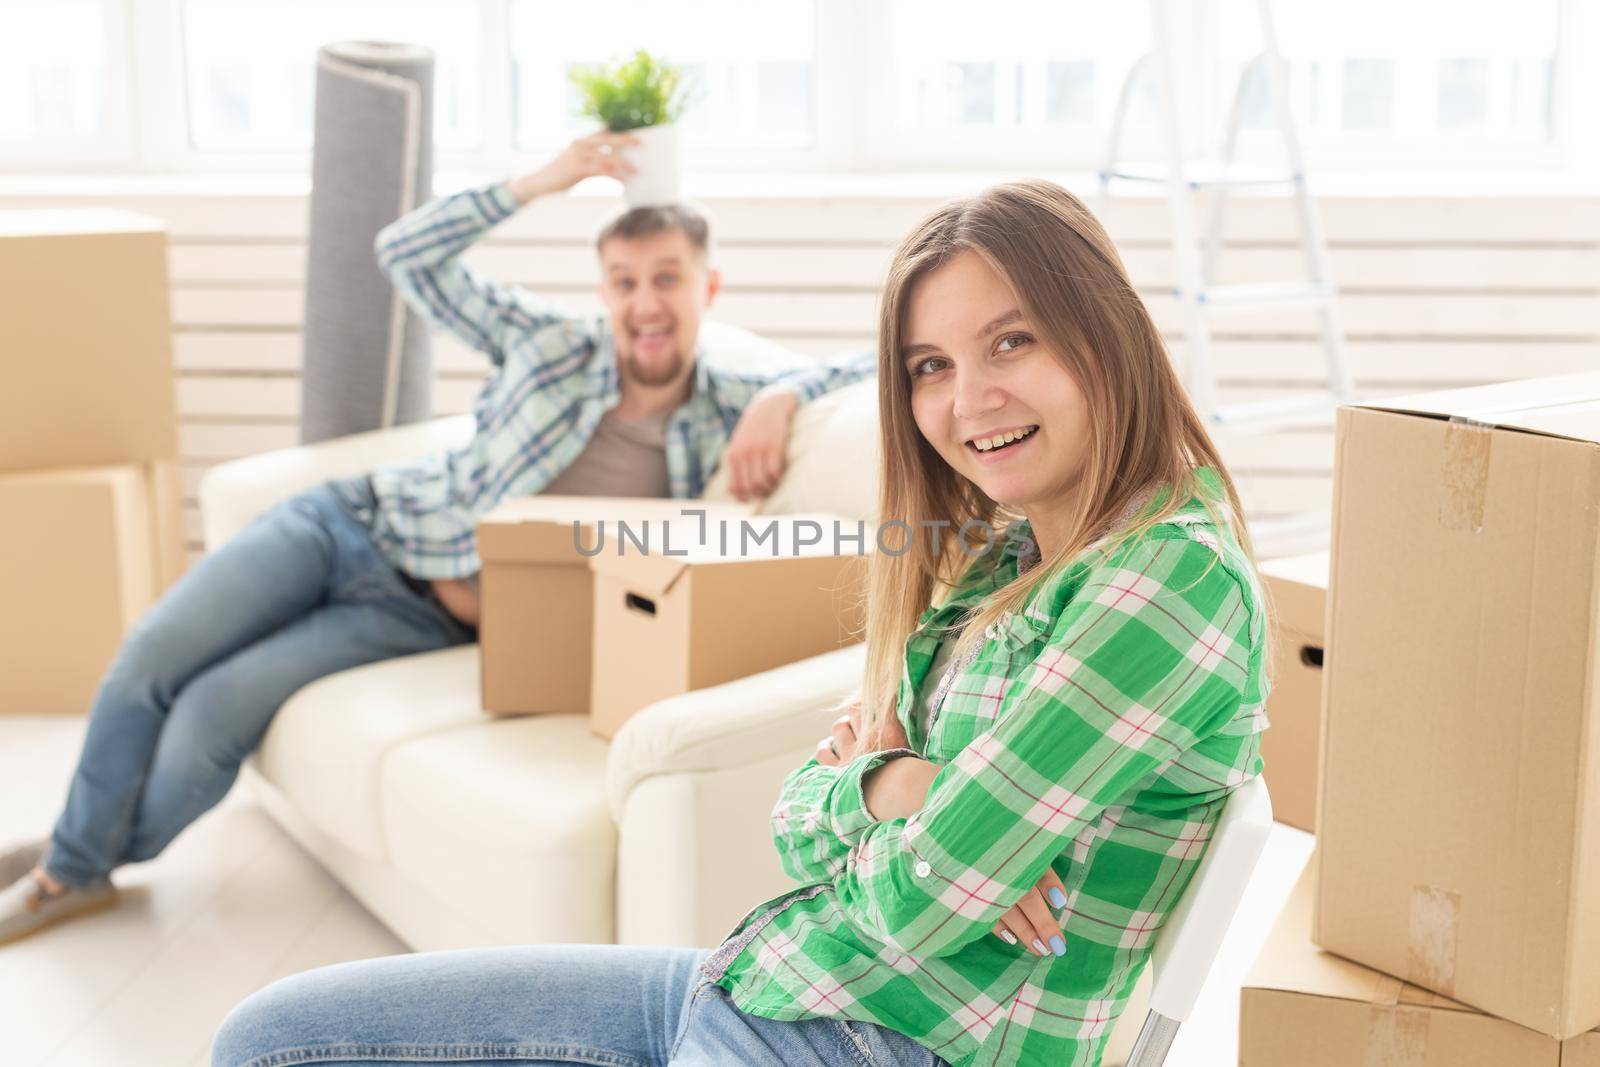 Positive smiling young girl sitting against her laughing blurred husband in a new living room while moving to a new home. The concept of joy from the possibility of finding new housing. by Satura86